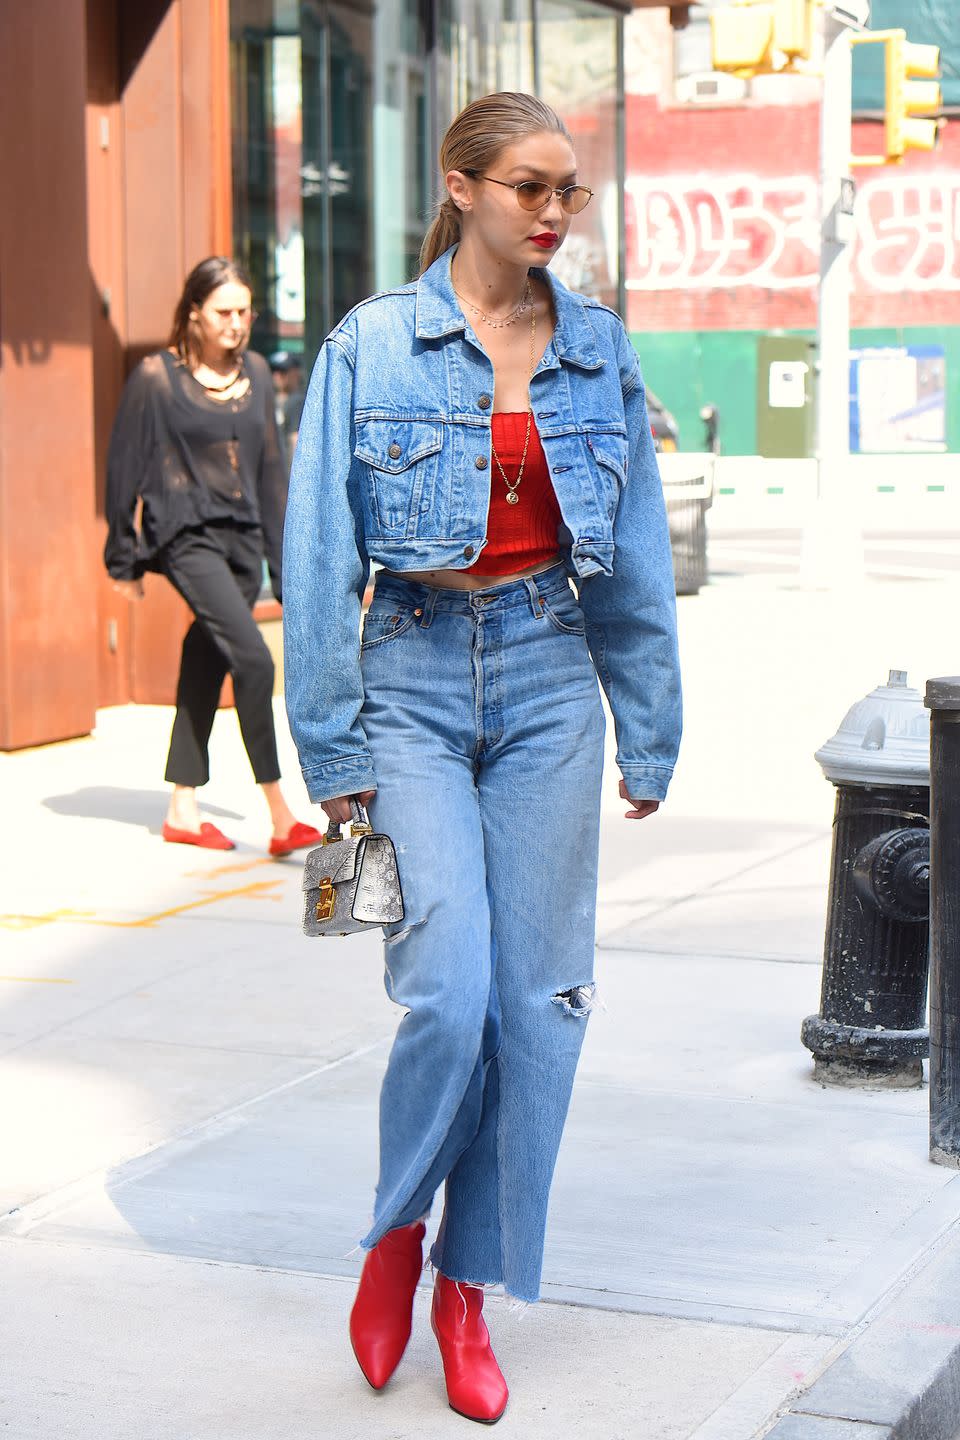 <p>As a dedicated lipstick-wearer, Gigi basically matched her entire outfit to her fave lippie: bright red. She rocked red shoes, a red crop, and red lipstick with denim staples to tie it all together. </p>